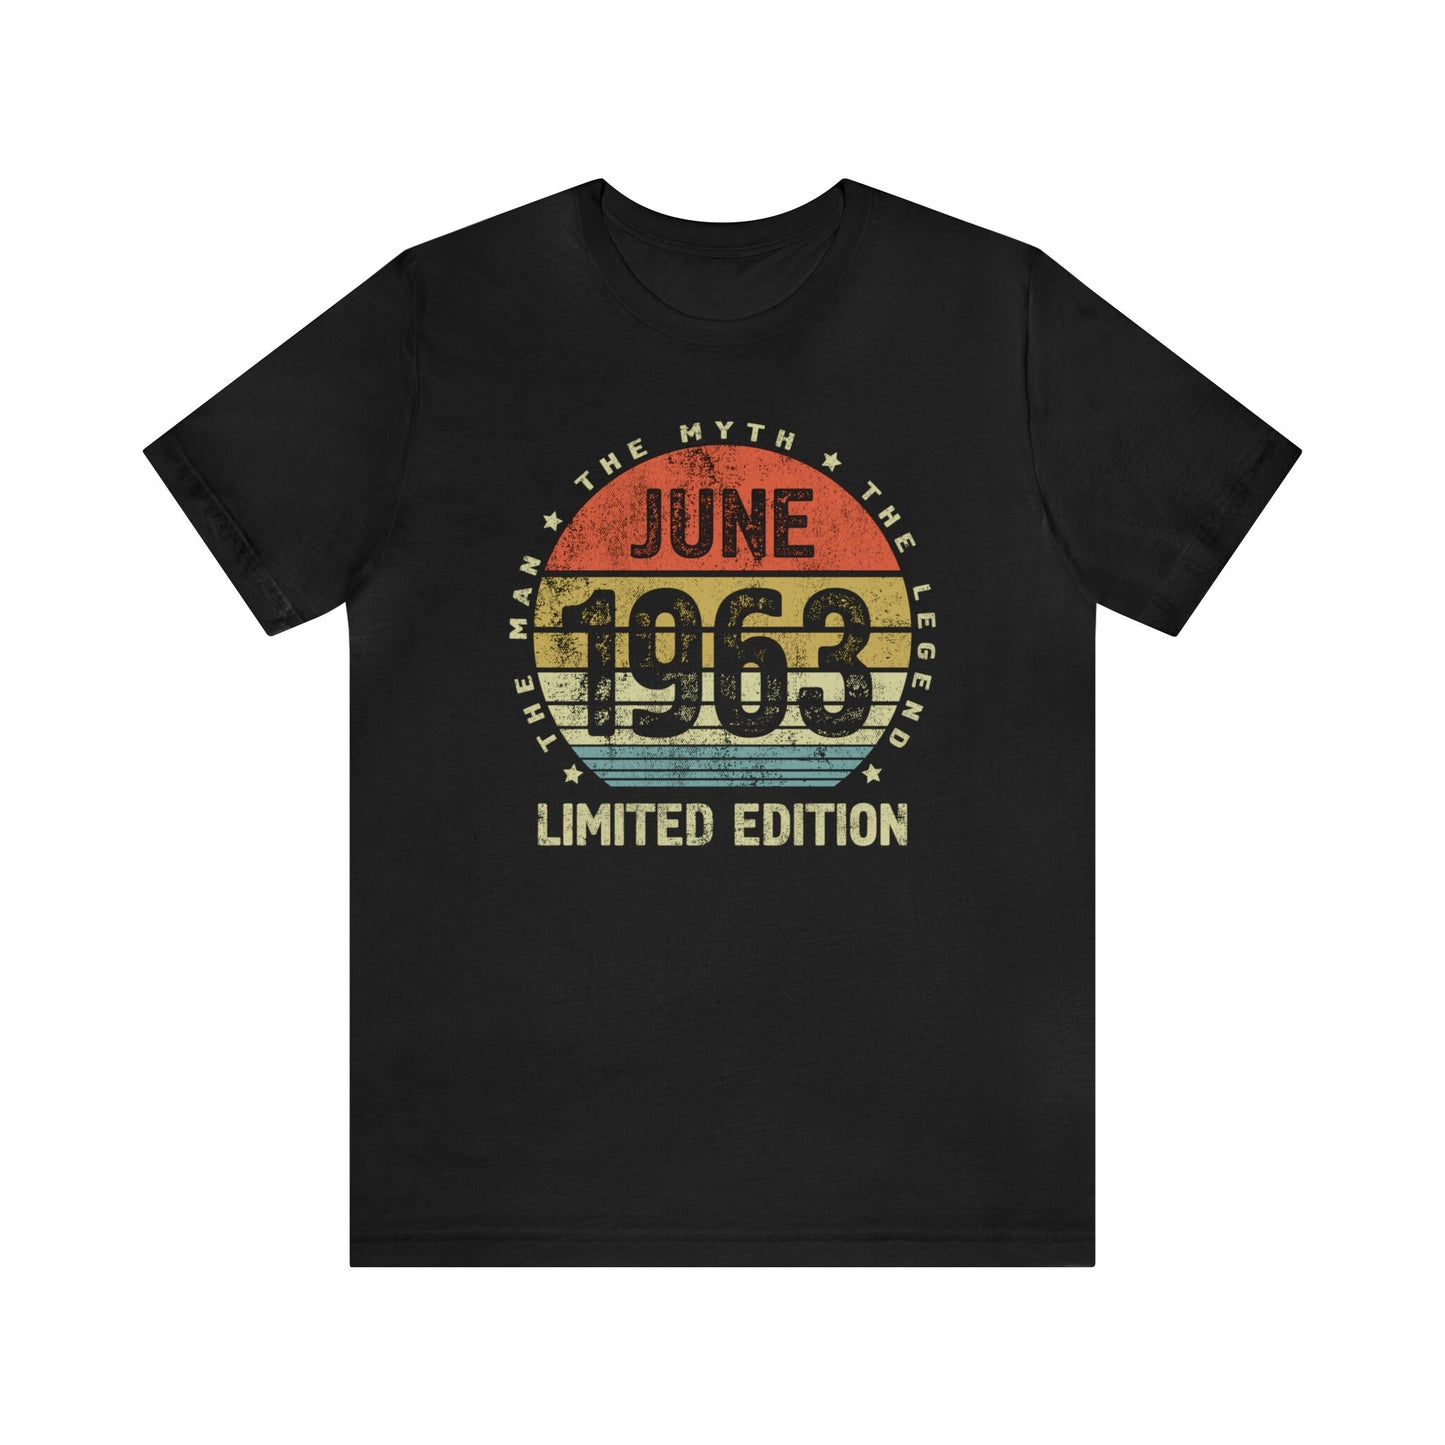 June 1963 Birthday Shirt for Husband or Men,  Personalized Gift T-shirt for Dad or Brother